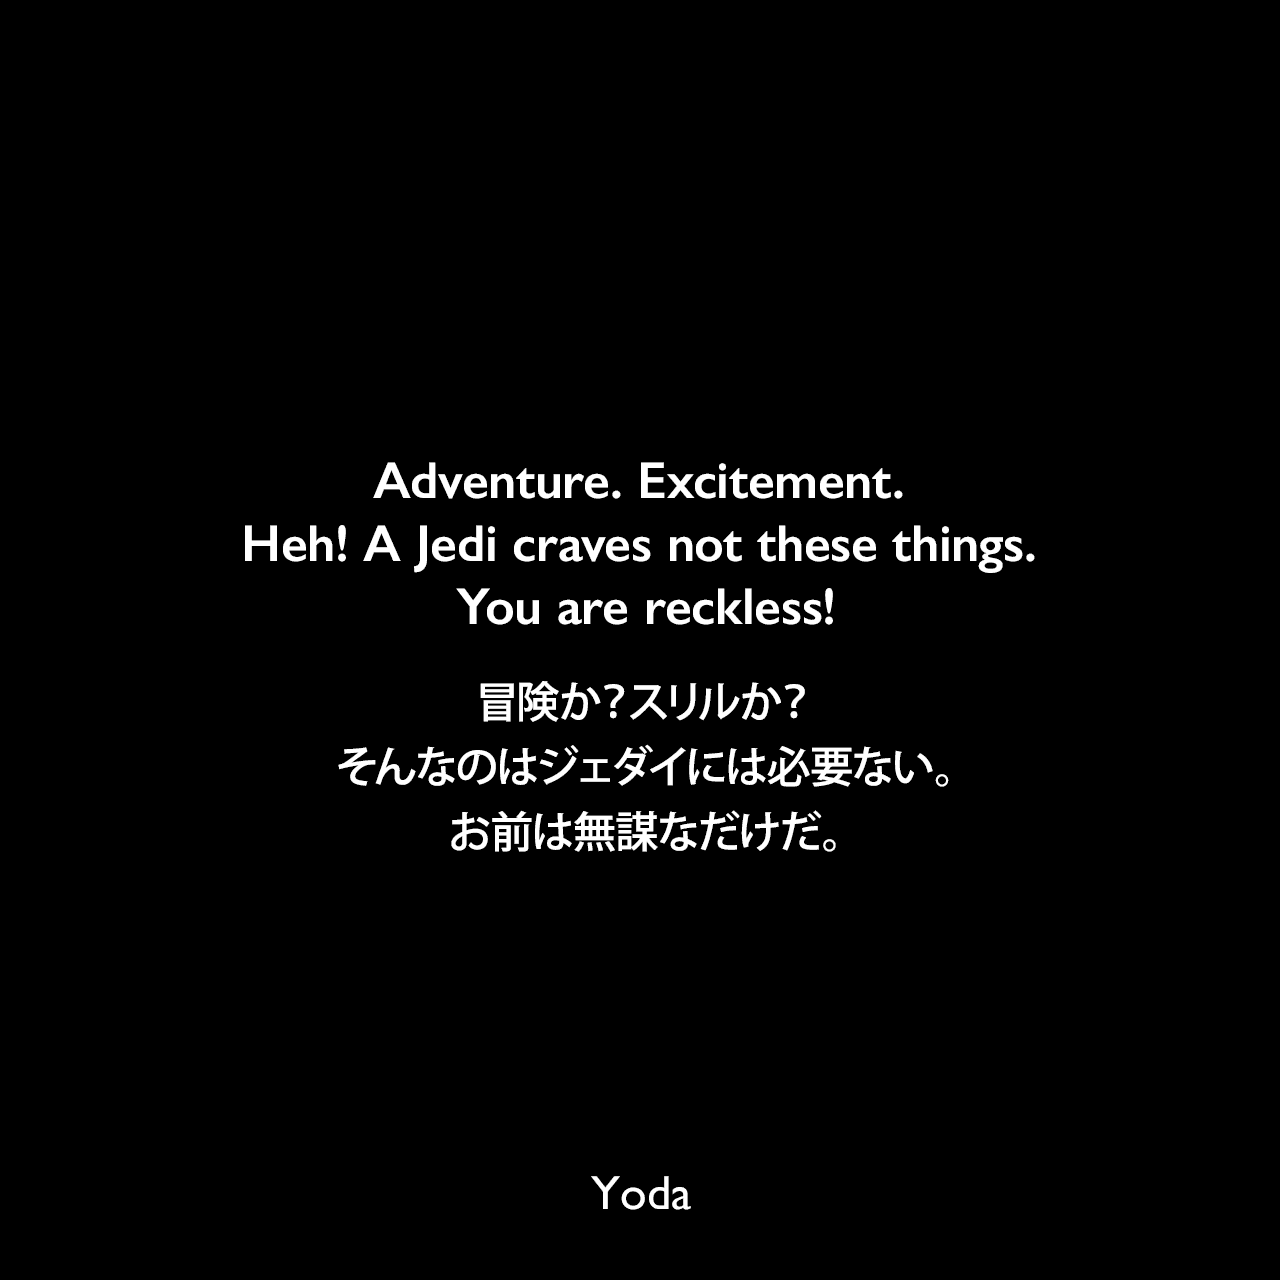 Adventure. Excitement. Heh! A Jedi craves not these things. You are reckless!冒険か？スリルか？そんなのはジェダイには必要ない。お前は無謀なだけだ。- スター・ウォーズ エピソード5/帝国の逆襲Yoda